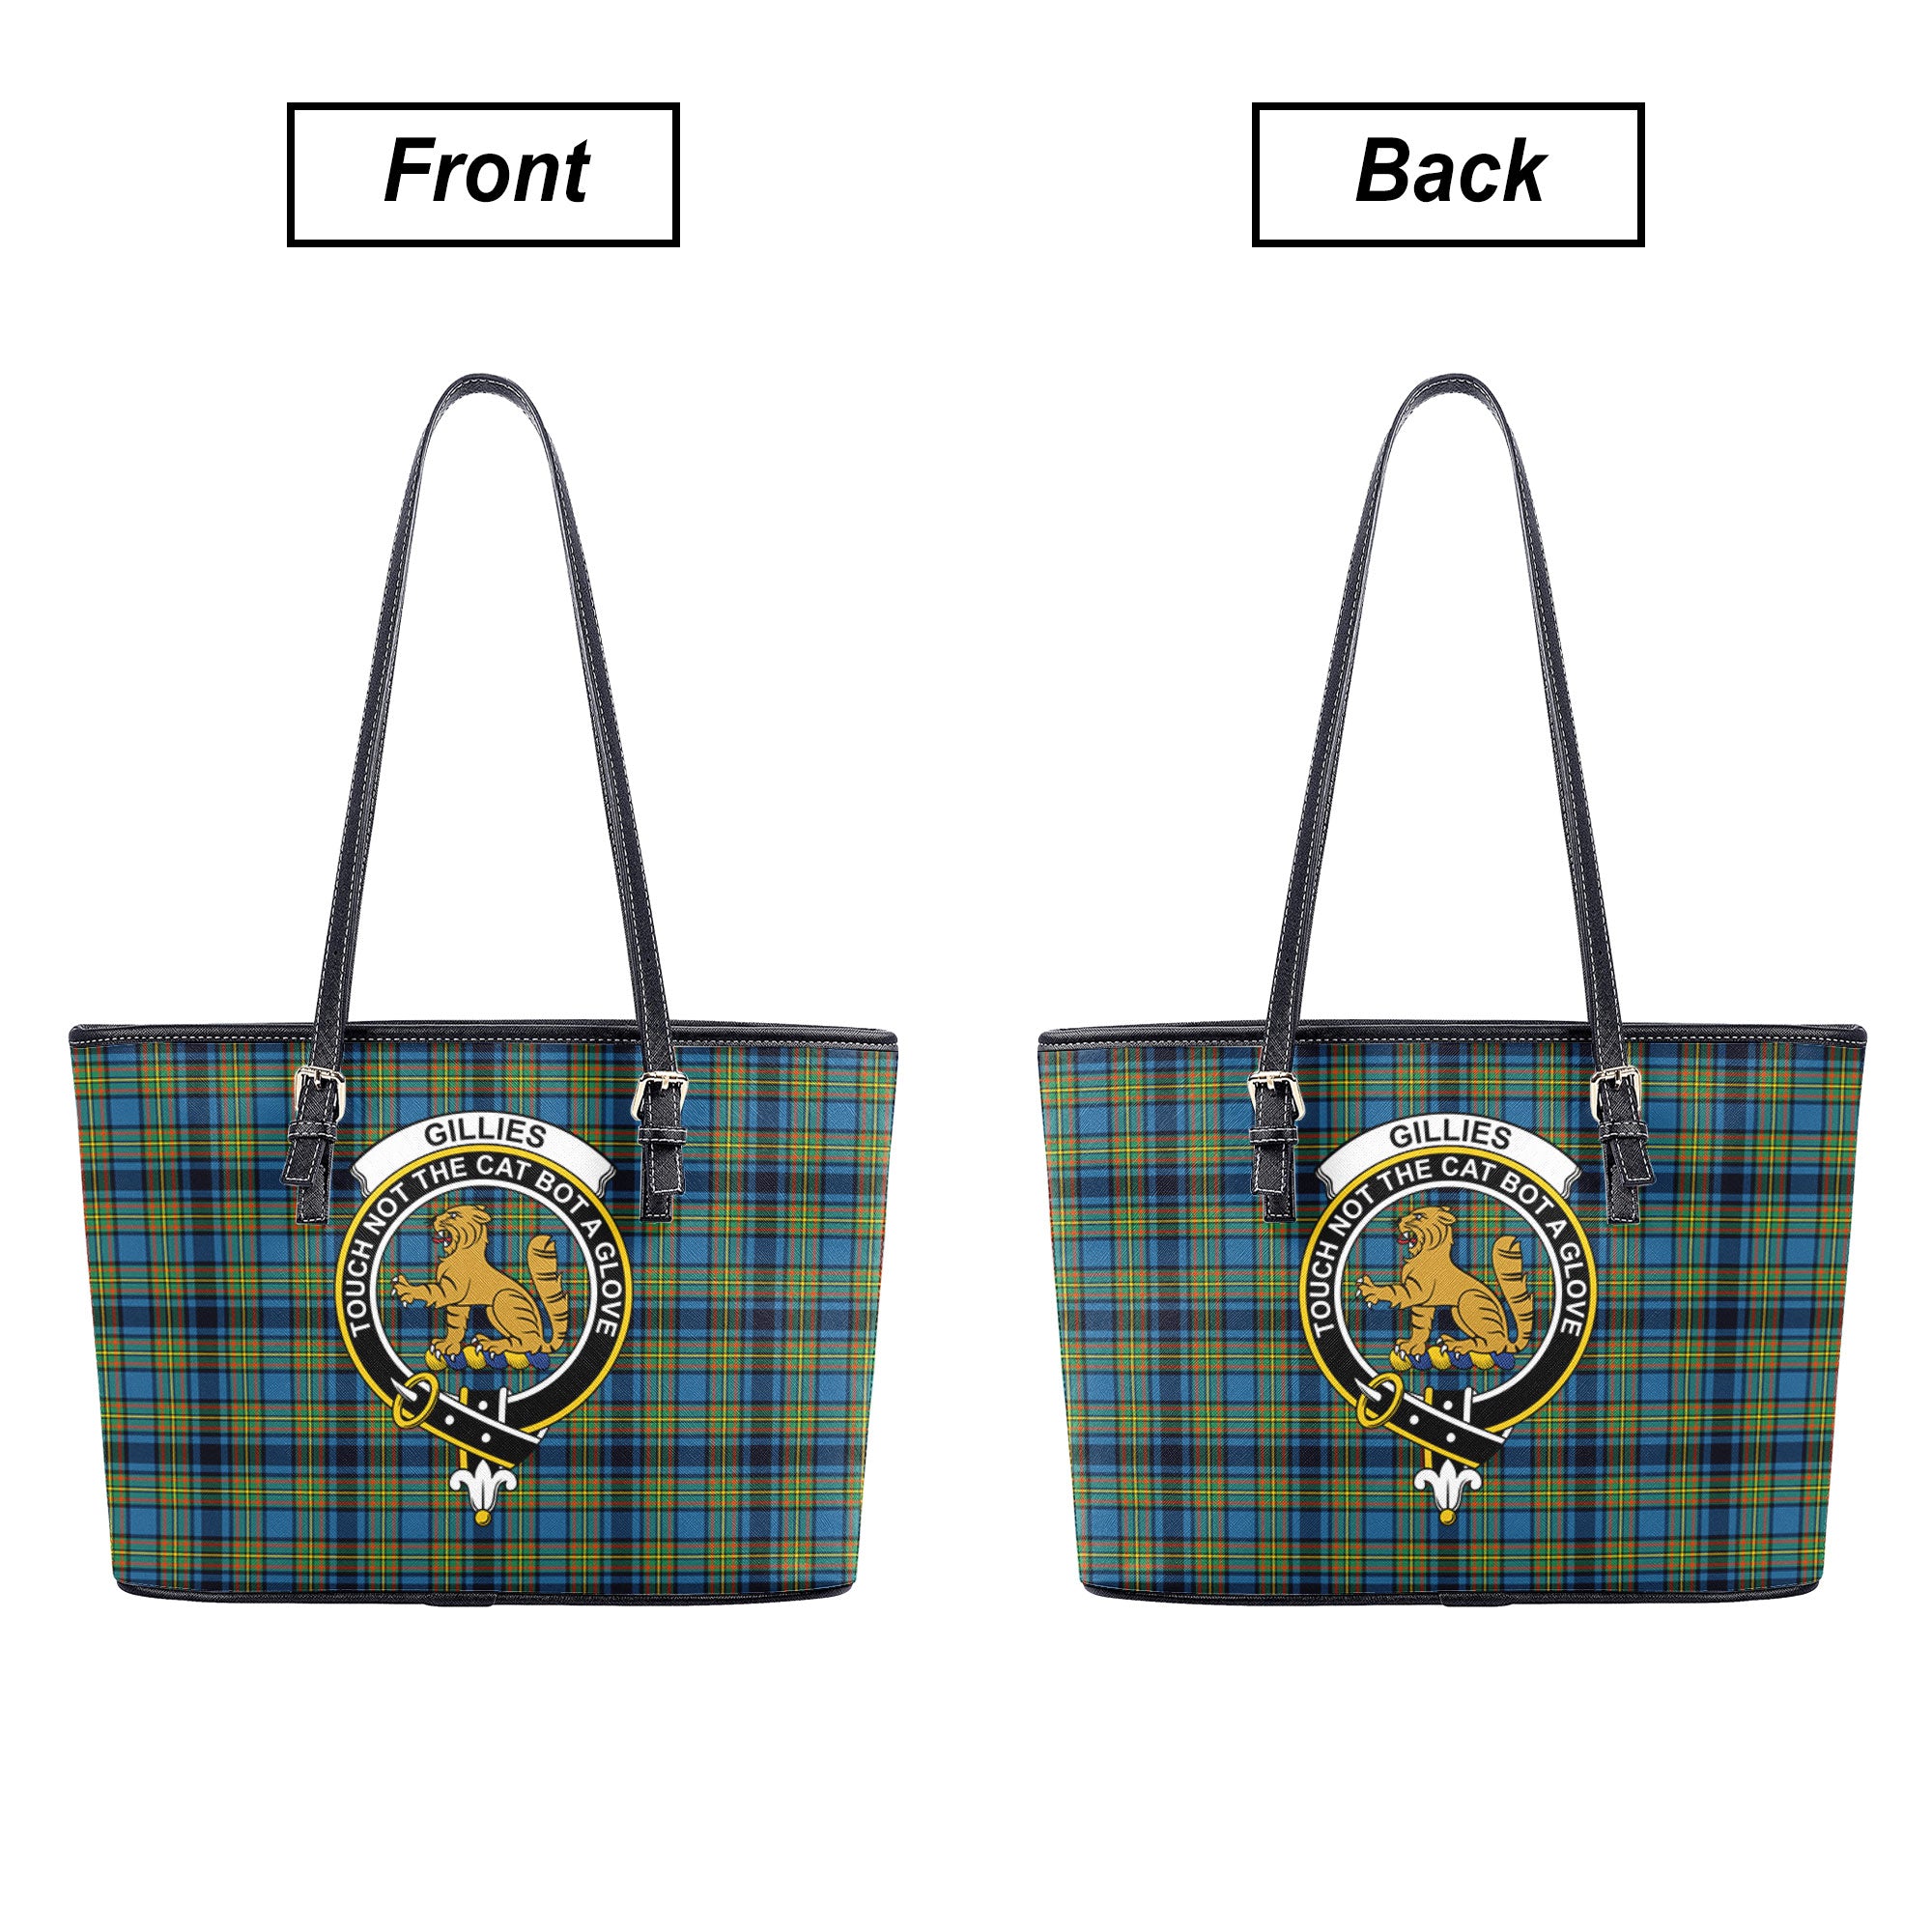 Gillies Ancient Tartan Crest Leather Tote Bag